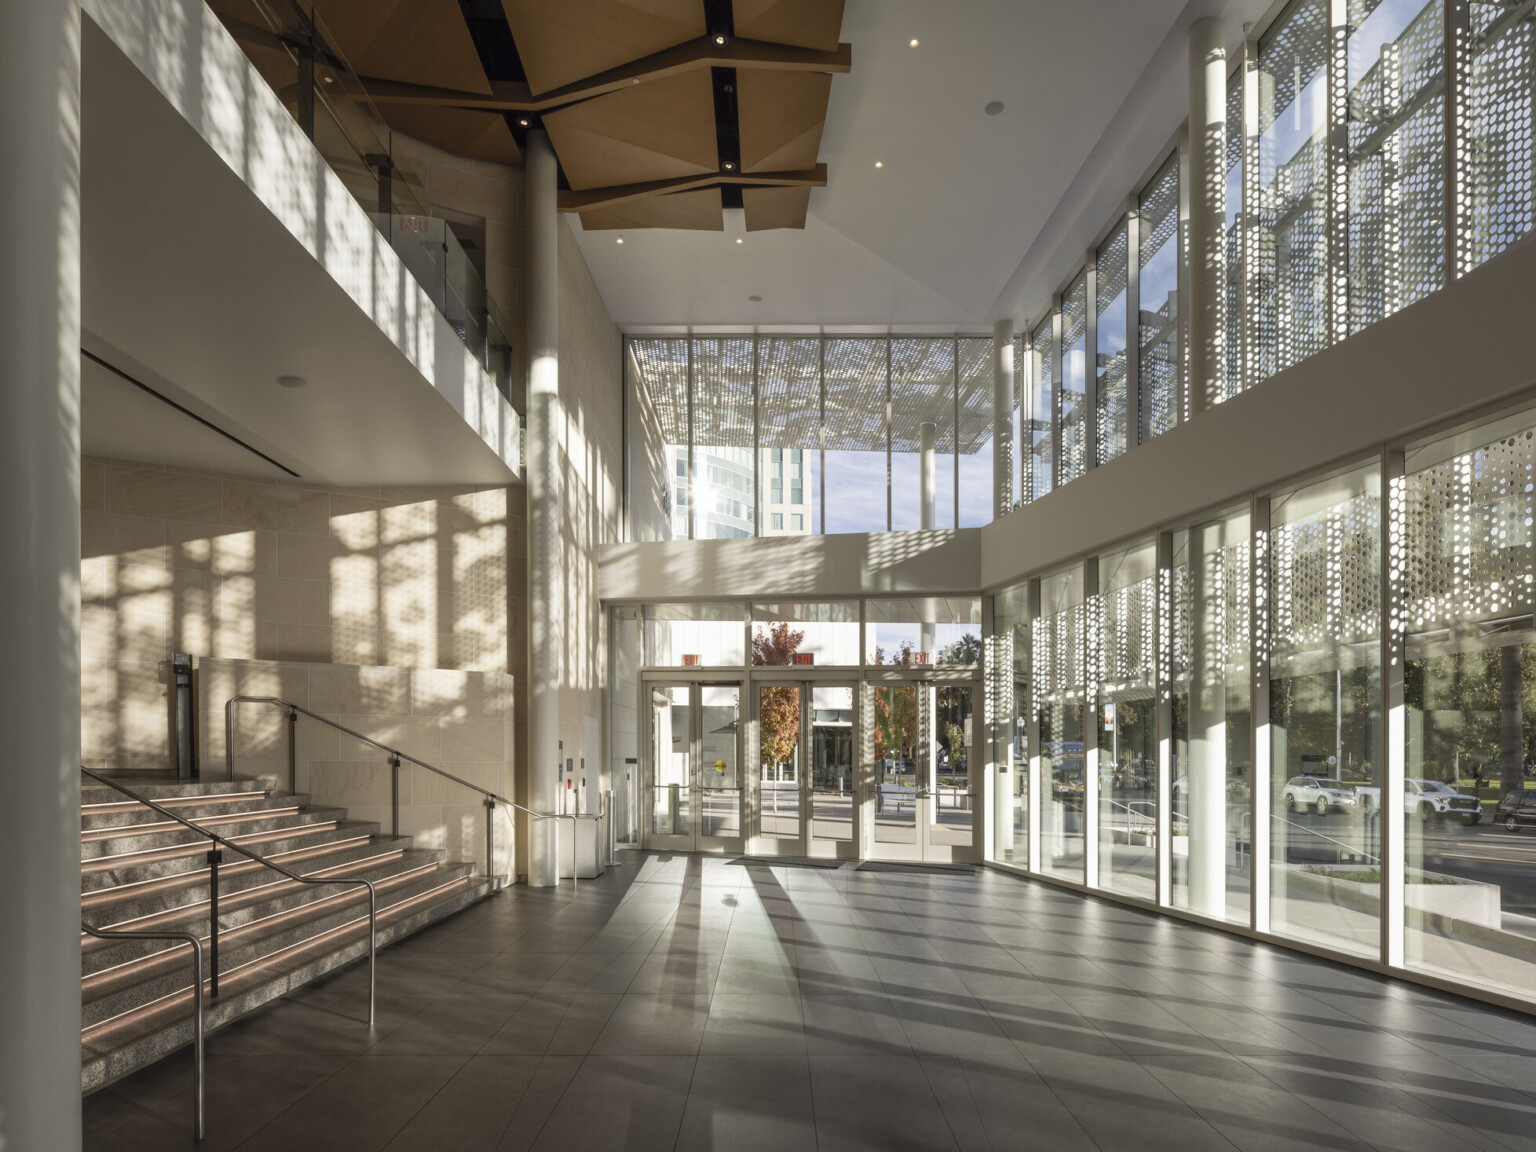 Two-story lobby space lit by floor to ceiling glass windows; wood sculpture covers ceiling; perforated light shines through the exterior lacy scrim